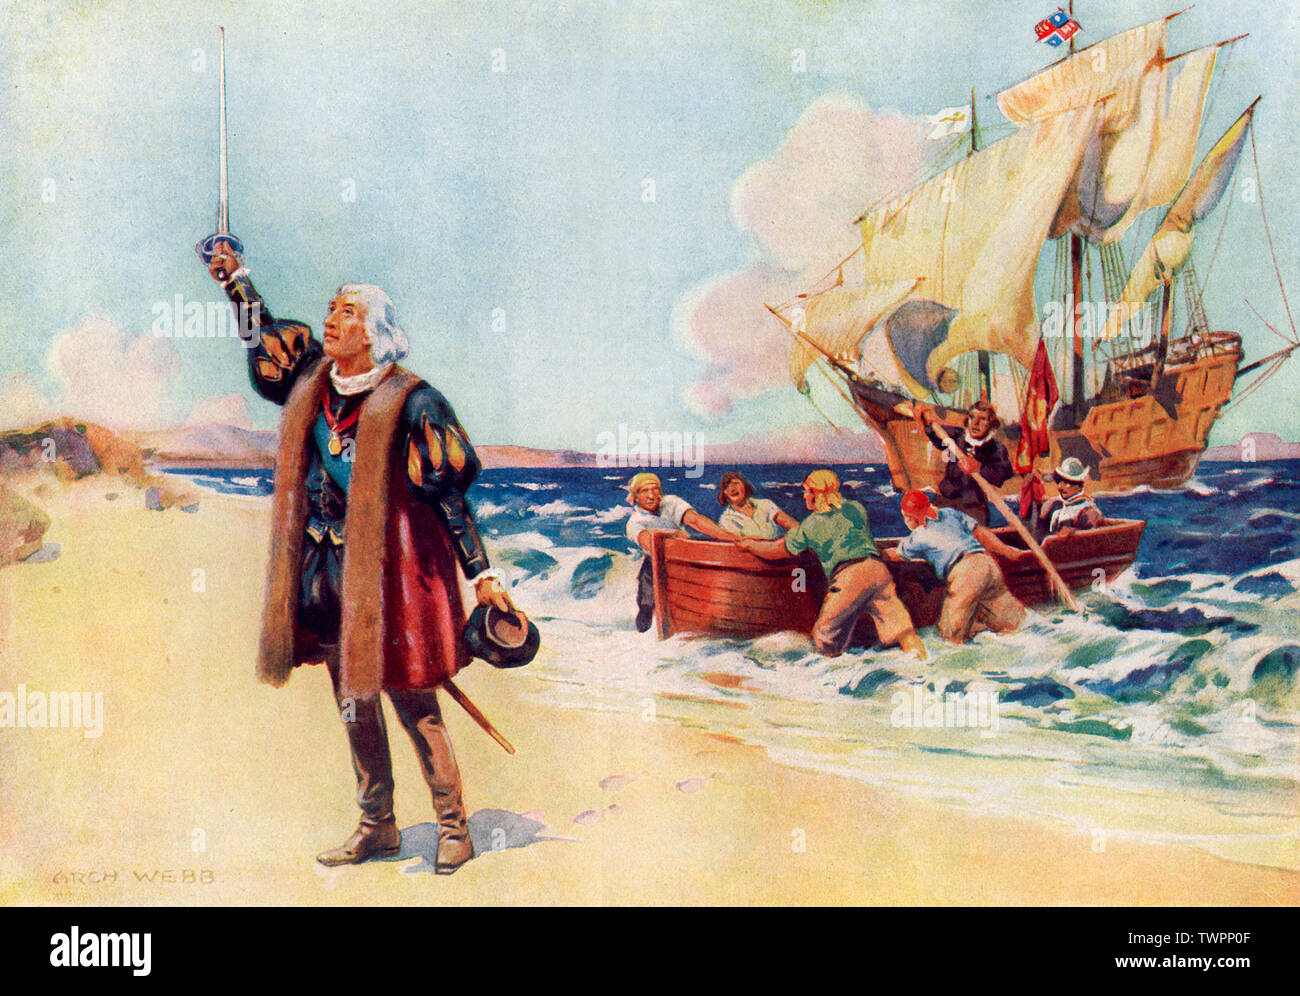 'Columbus landing in America, 12th October 1492'. By Archibald Bertram Webb (1887-1944). Christopher Columbus (1451-1506) was an Italian explorer, navigator, and coloniser. Although Columbus was not the first European explorer to reach the Americas (Leif Ericson having reached the Americas in the 11th century), Columbus's voyages led to the first lasting European contact with the Americas. Columbus is seen landing on one of the islands of the modern day Bahamas which he would name San Salvador. Stock Photo